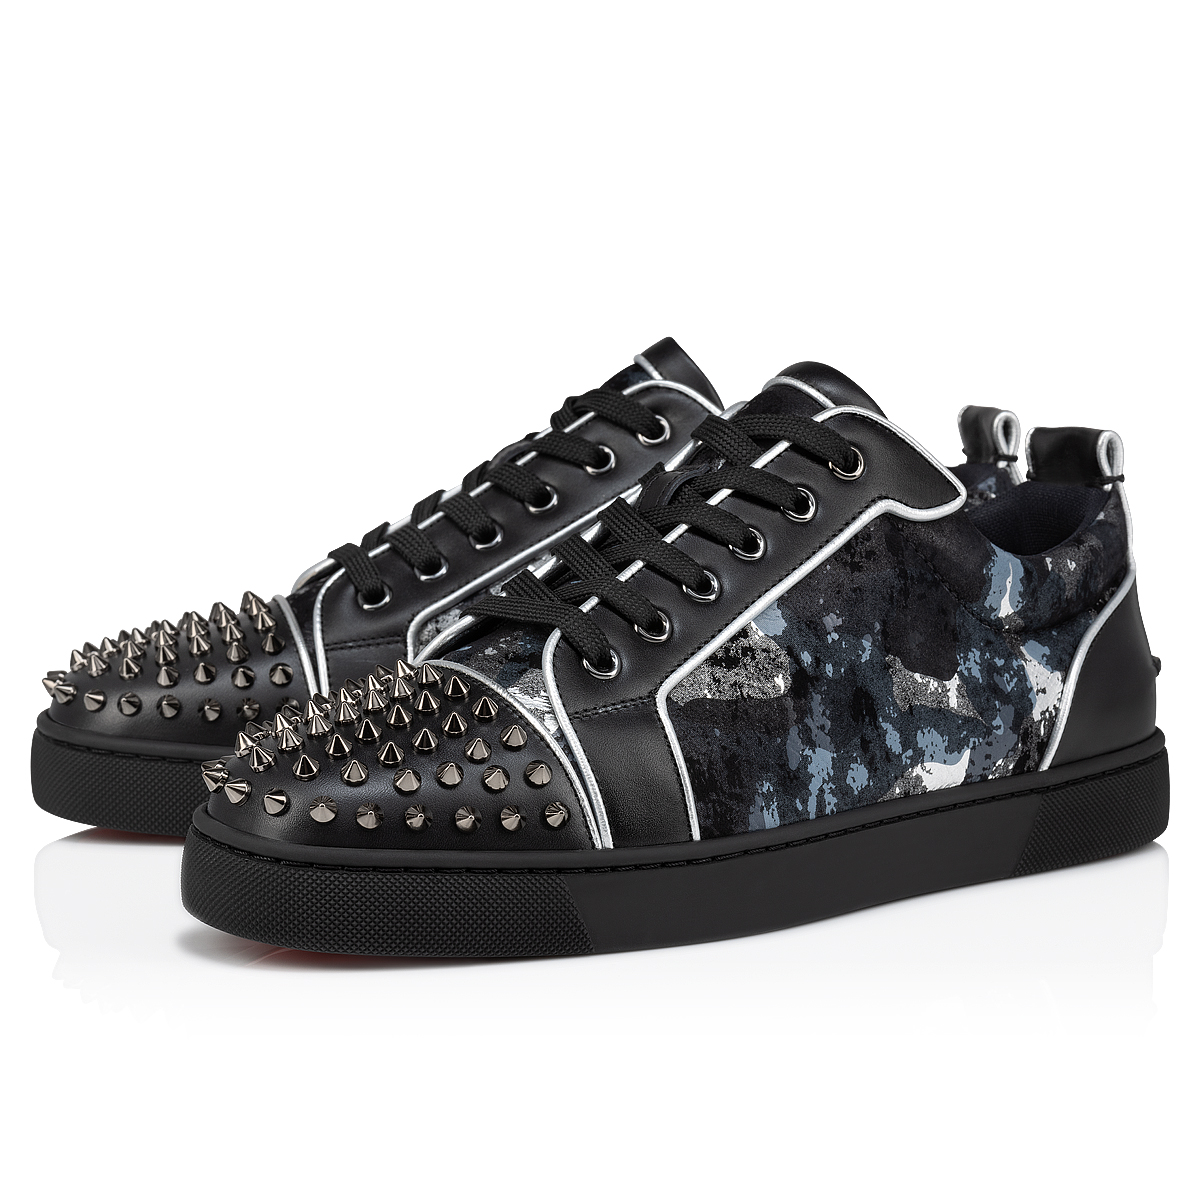 Louis Strass - Sneakers - Suede calf and strass - Black - Christian  Louboutin United States